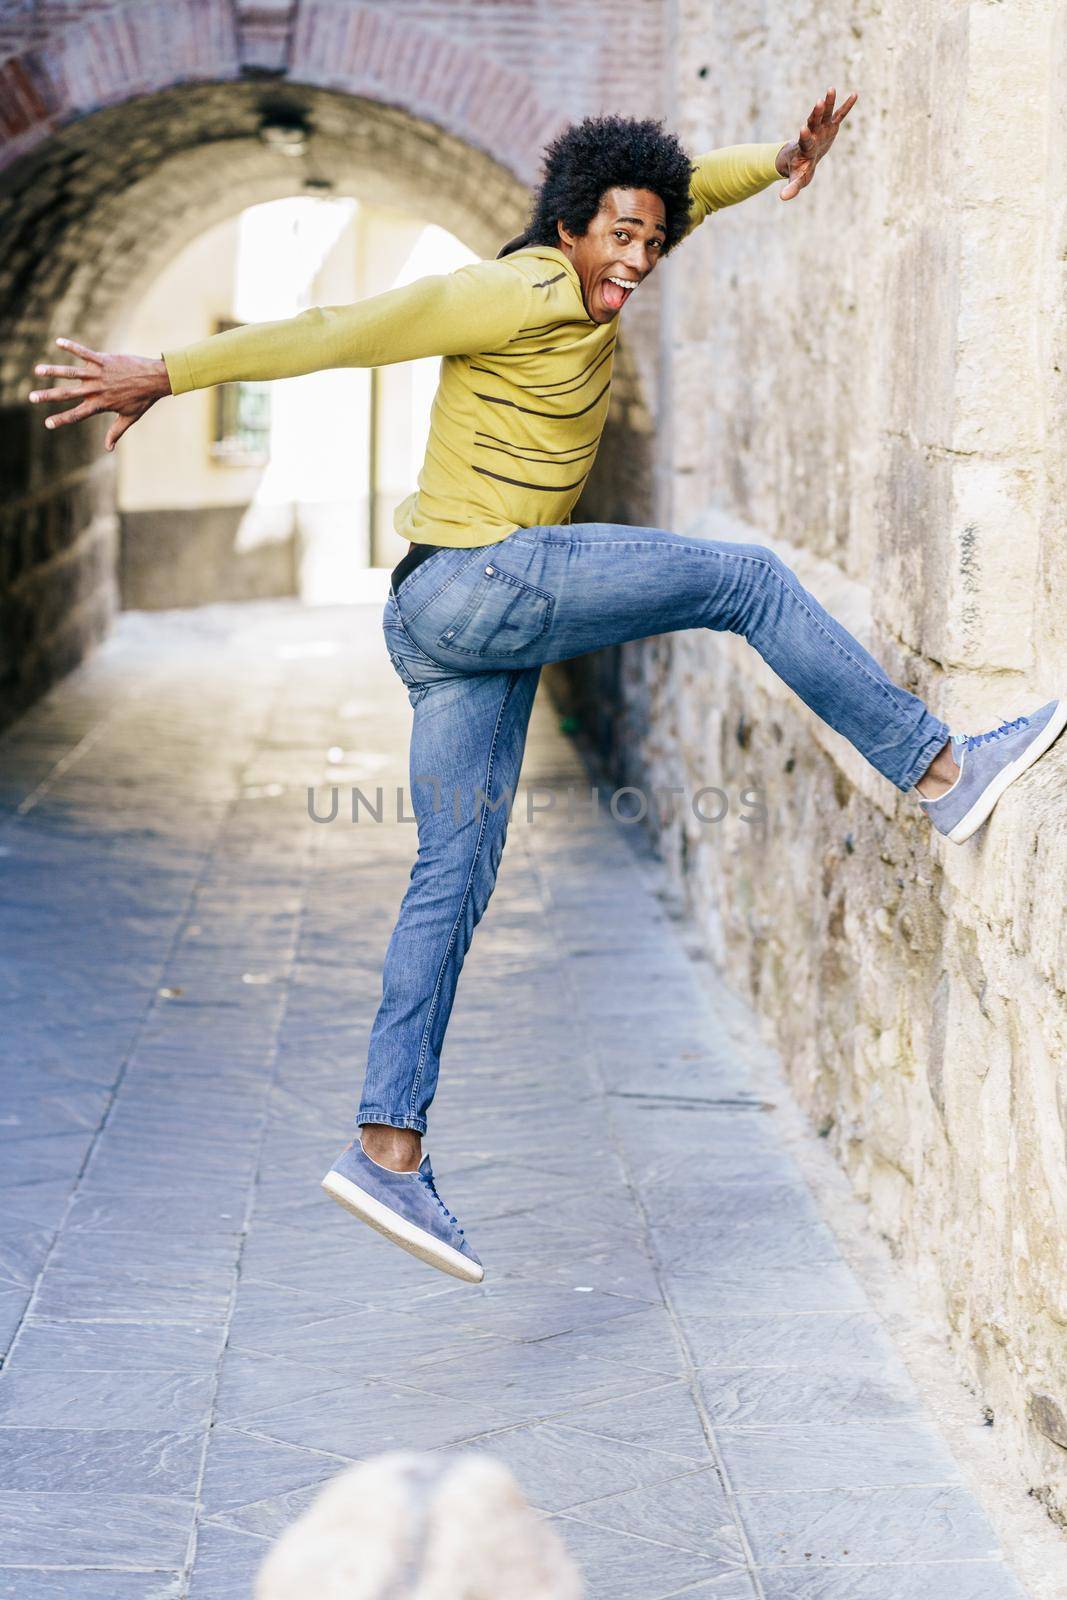 Black man with afro hair jumping for joy on the street